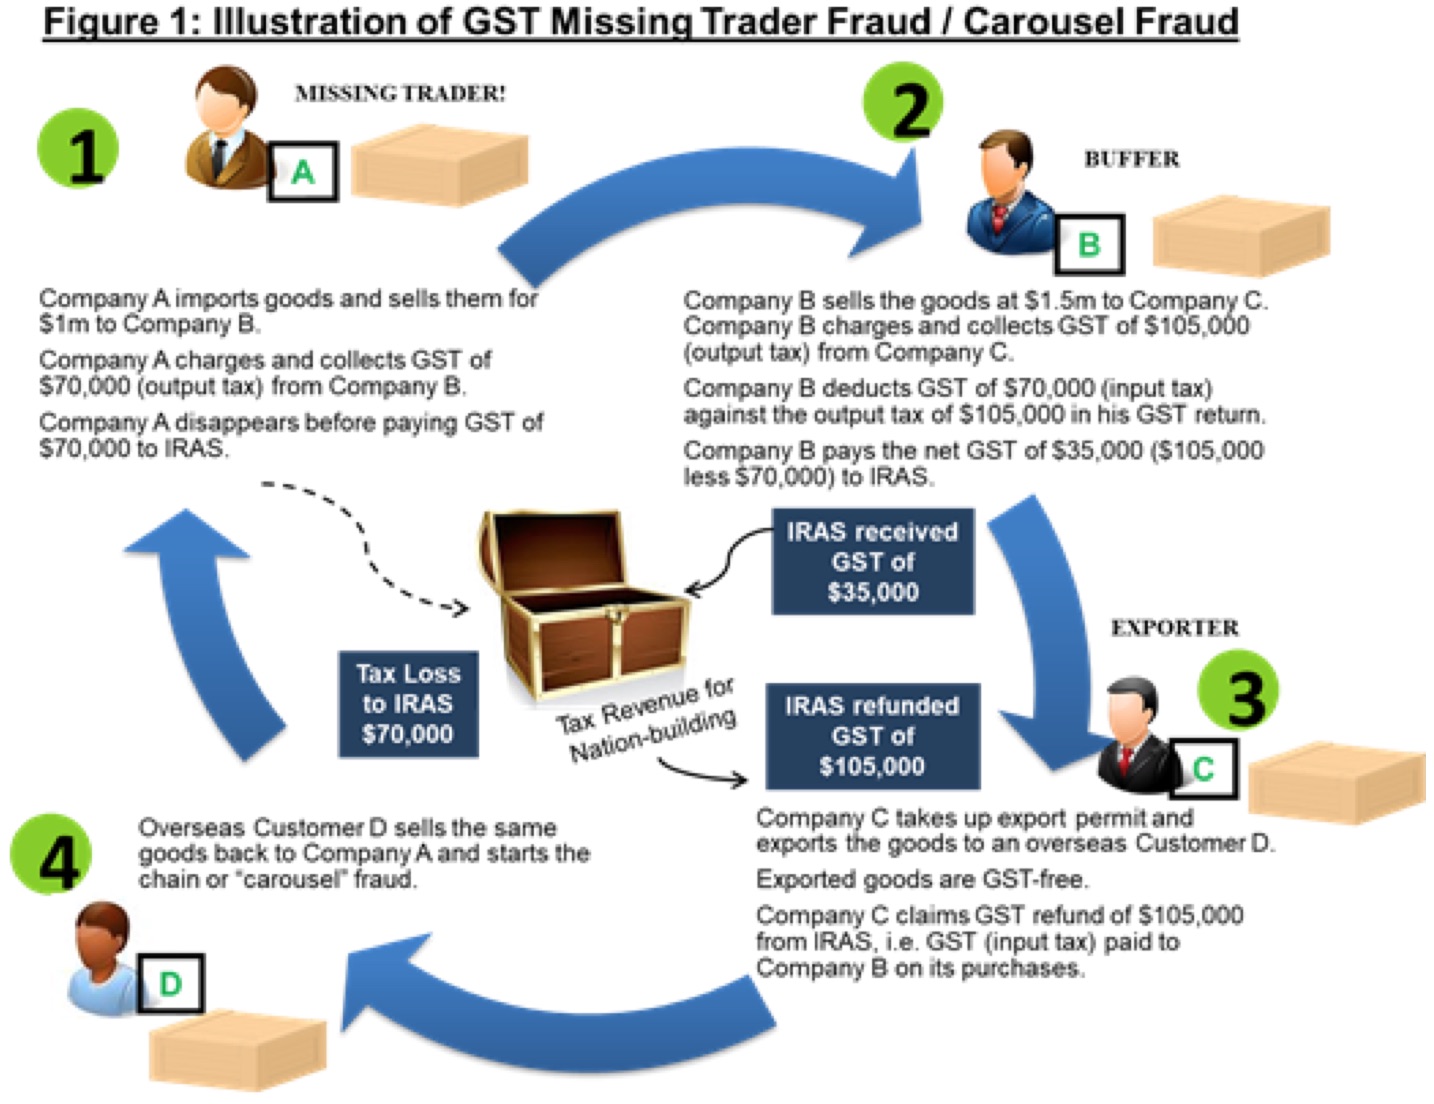 Six Individuals Charged For Perpetrating Goods And Services Tax Missing Trader Fraud Involving Approximately S$114 Million Of Fictitious Sales